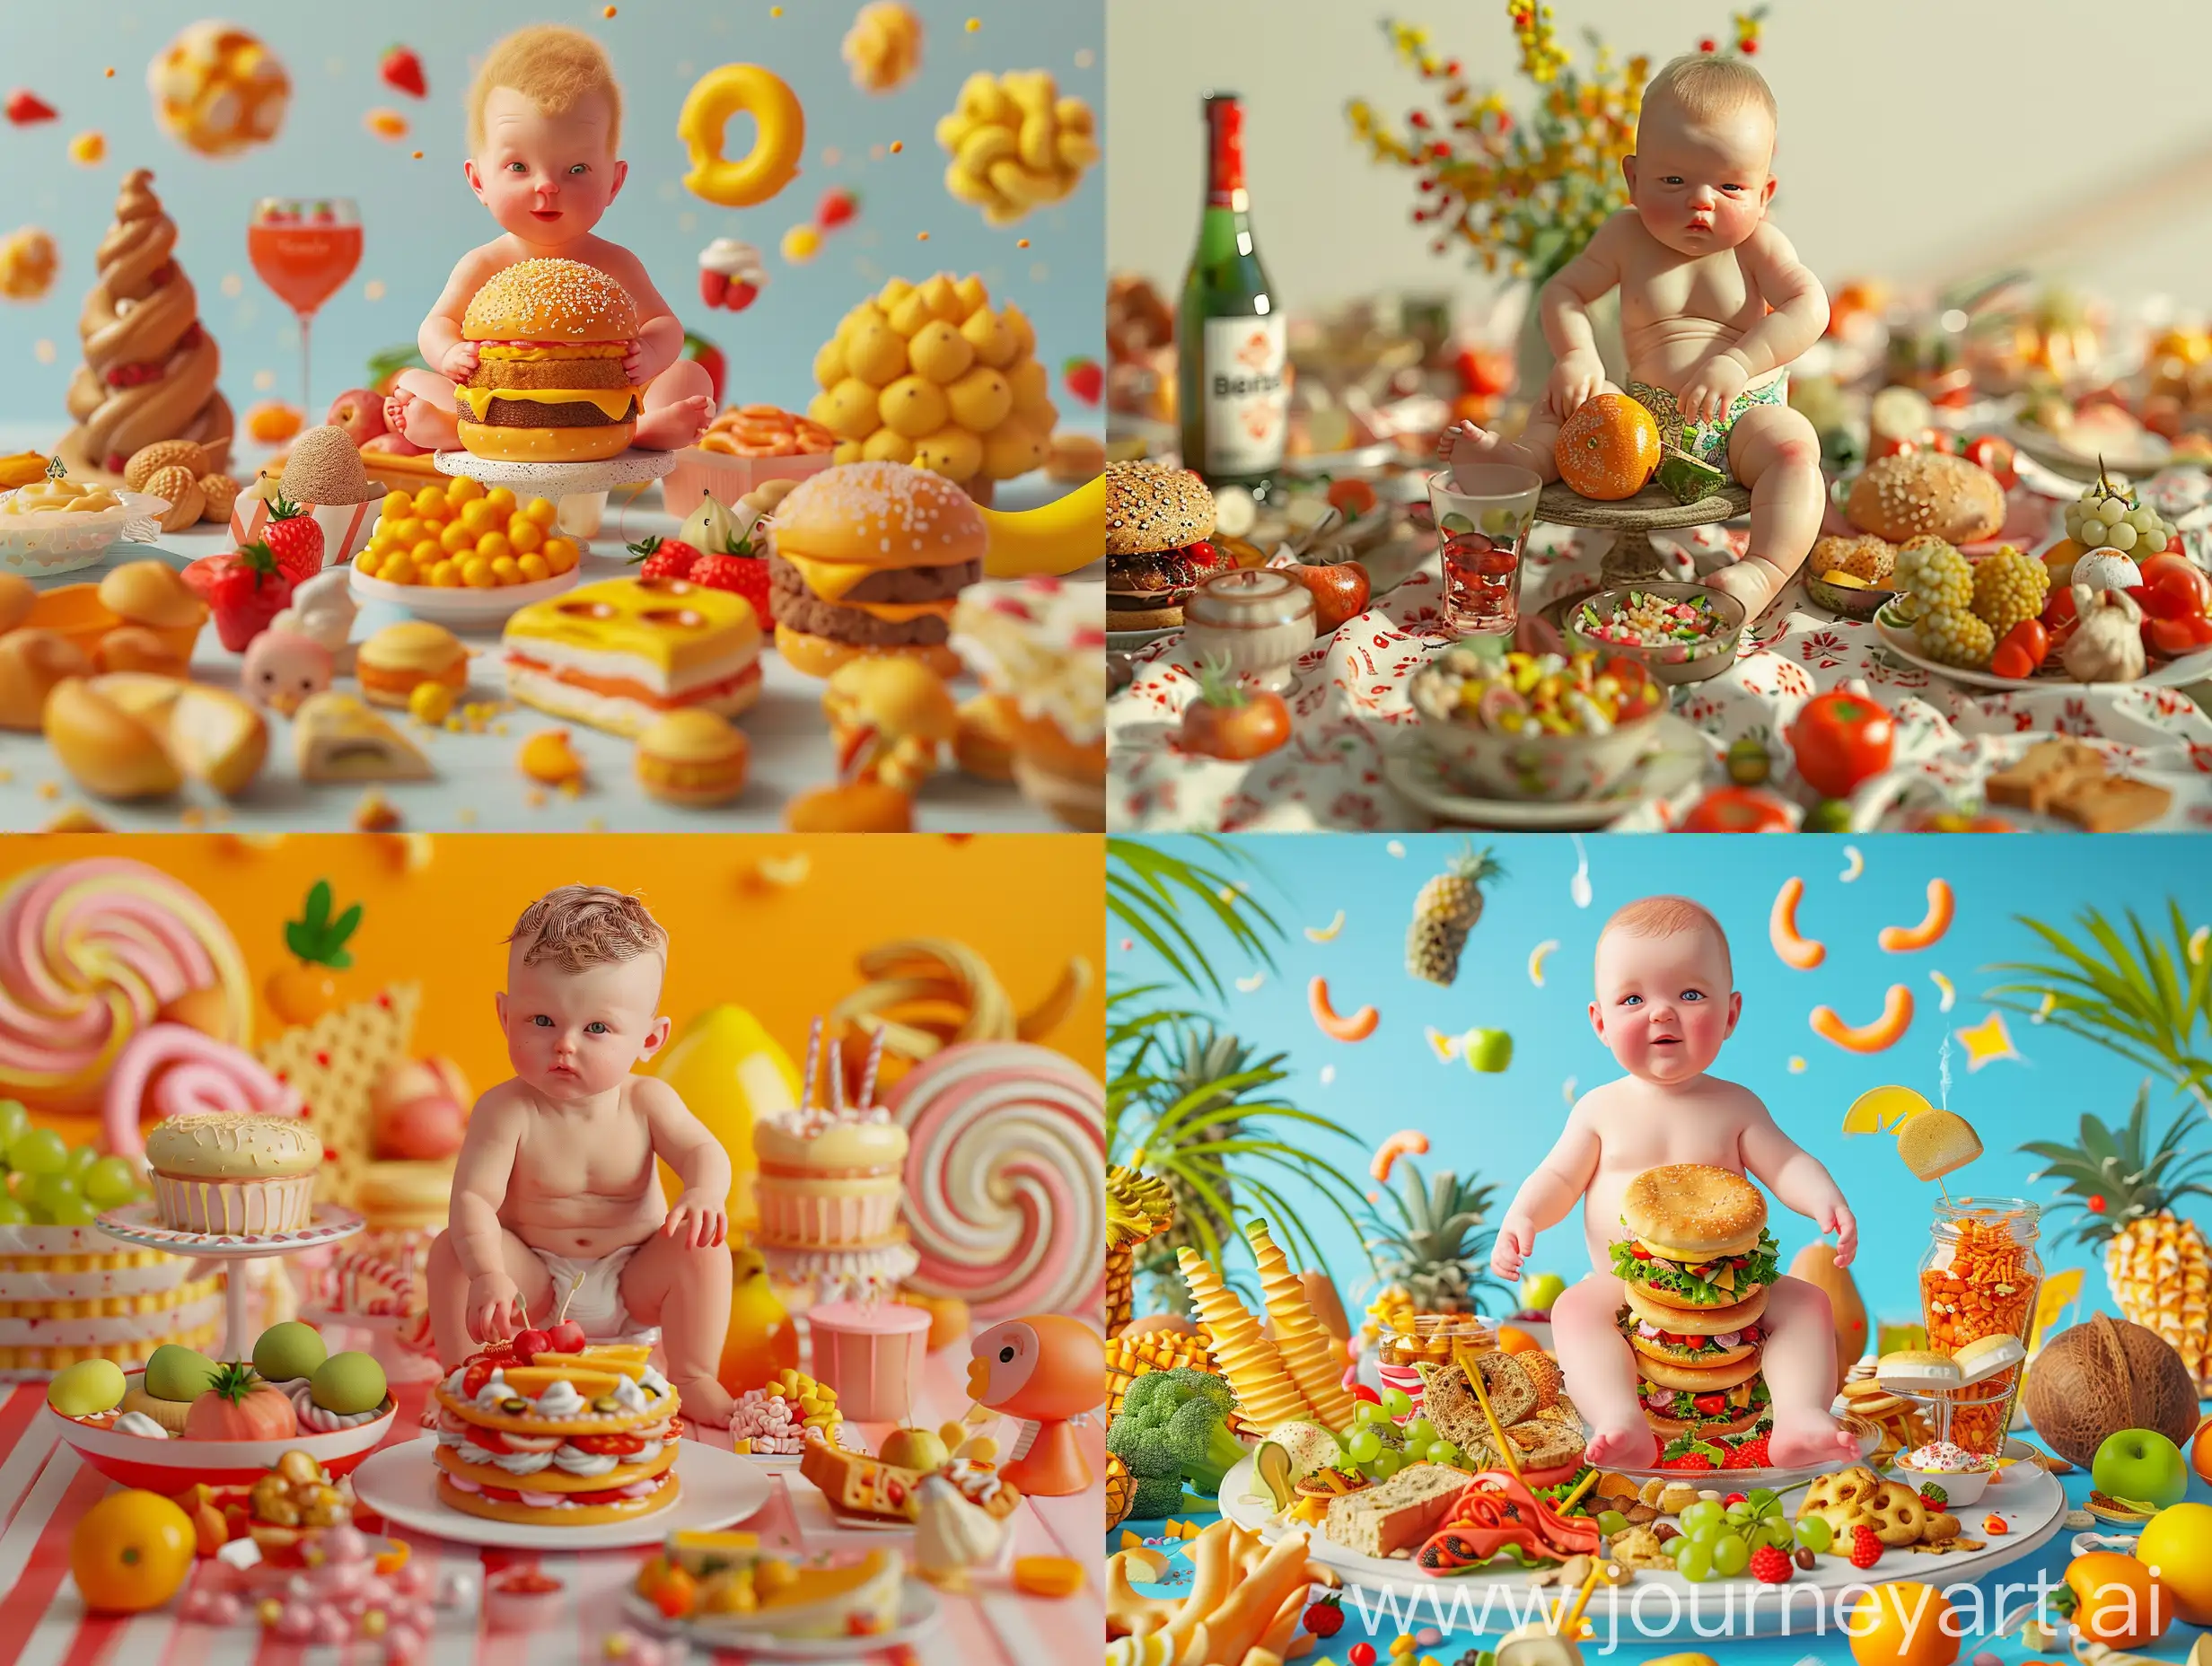 Baby-Sitting-on-Table-Surrounded-by-Food-Ultra-Realistic-3D-Render-Advertisement